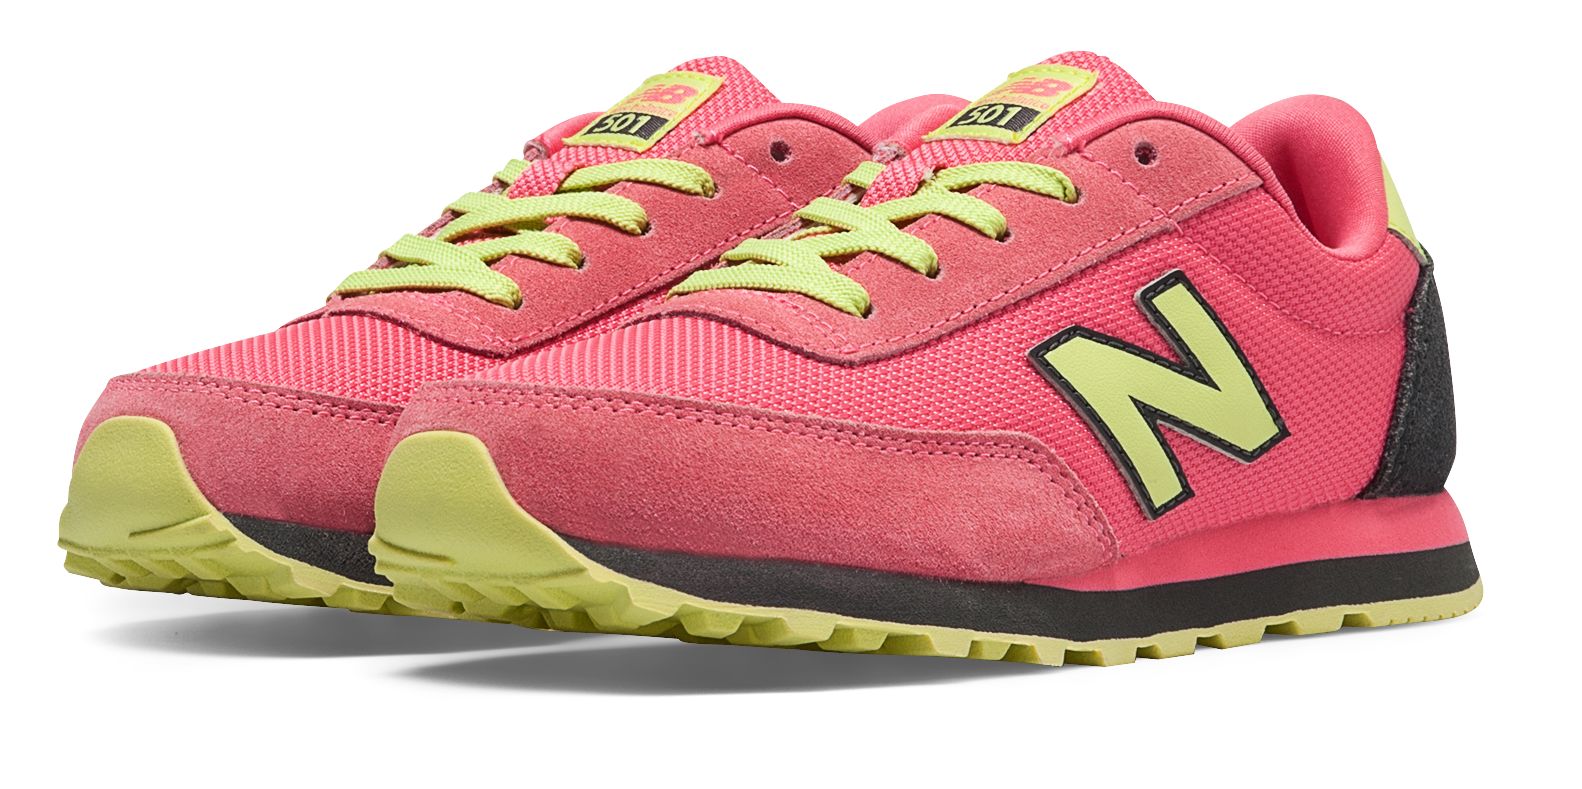 Classic Athletic Shoes for Pre-school Girls - New Balance